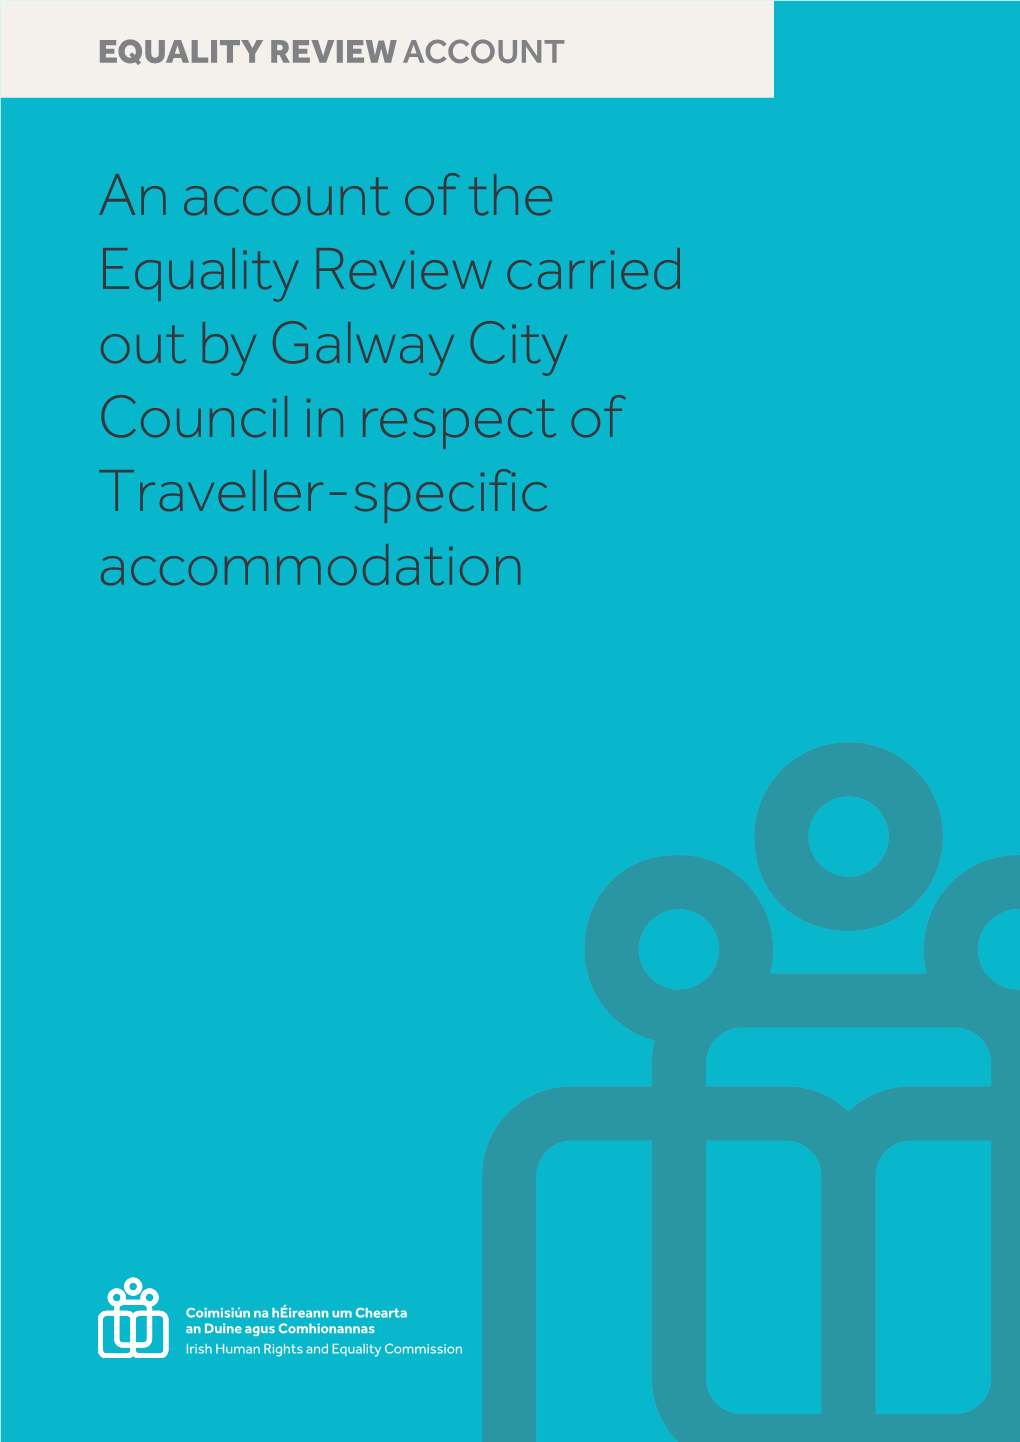 Galway City Equality Review IHREC